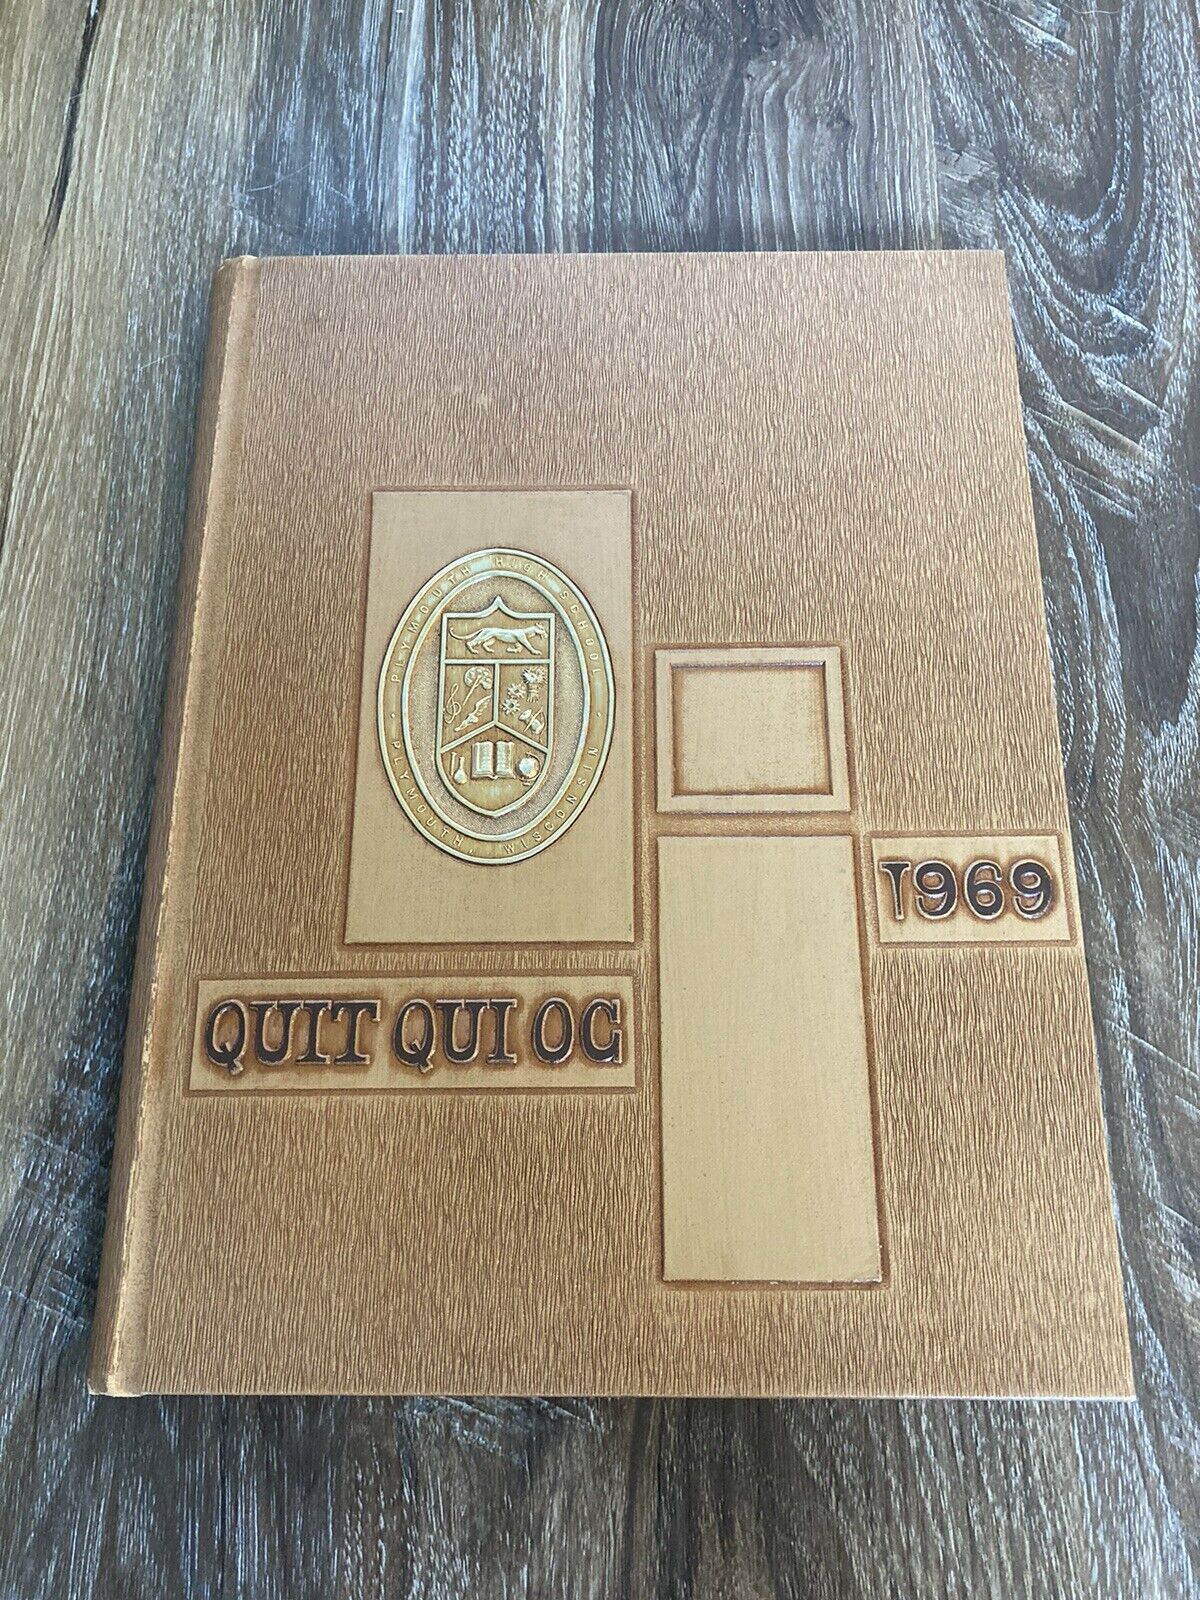 1969 Plymouth High School Wisconsin Yearbook Quit Qui Oc - Governor Tony Evers